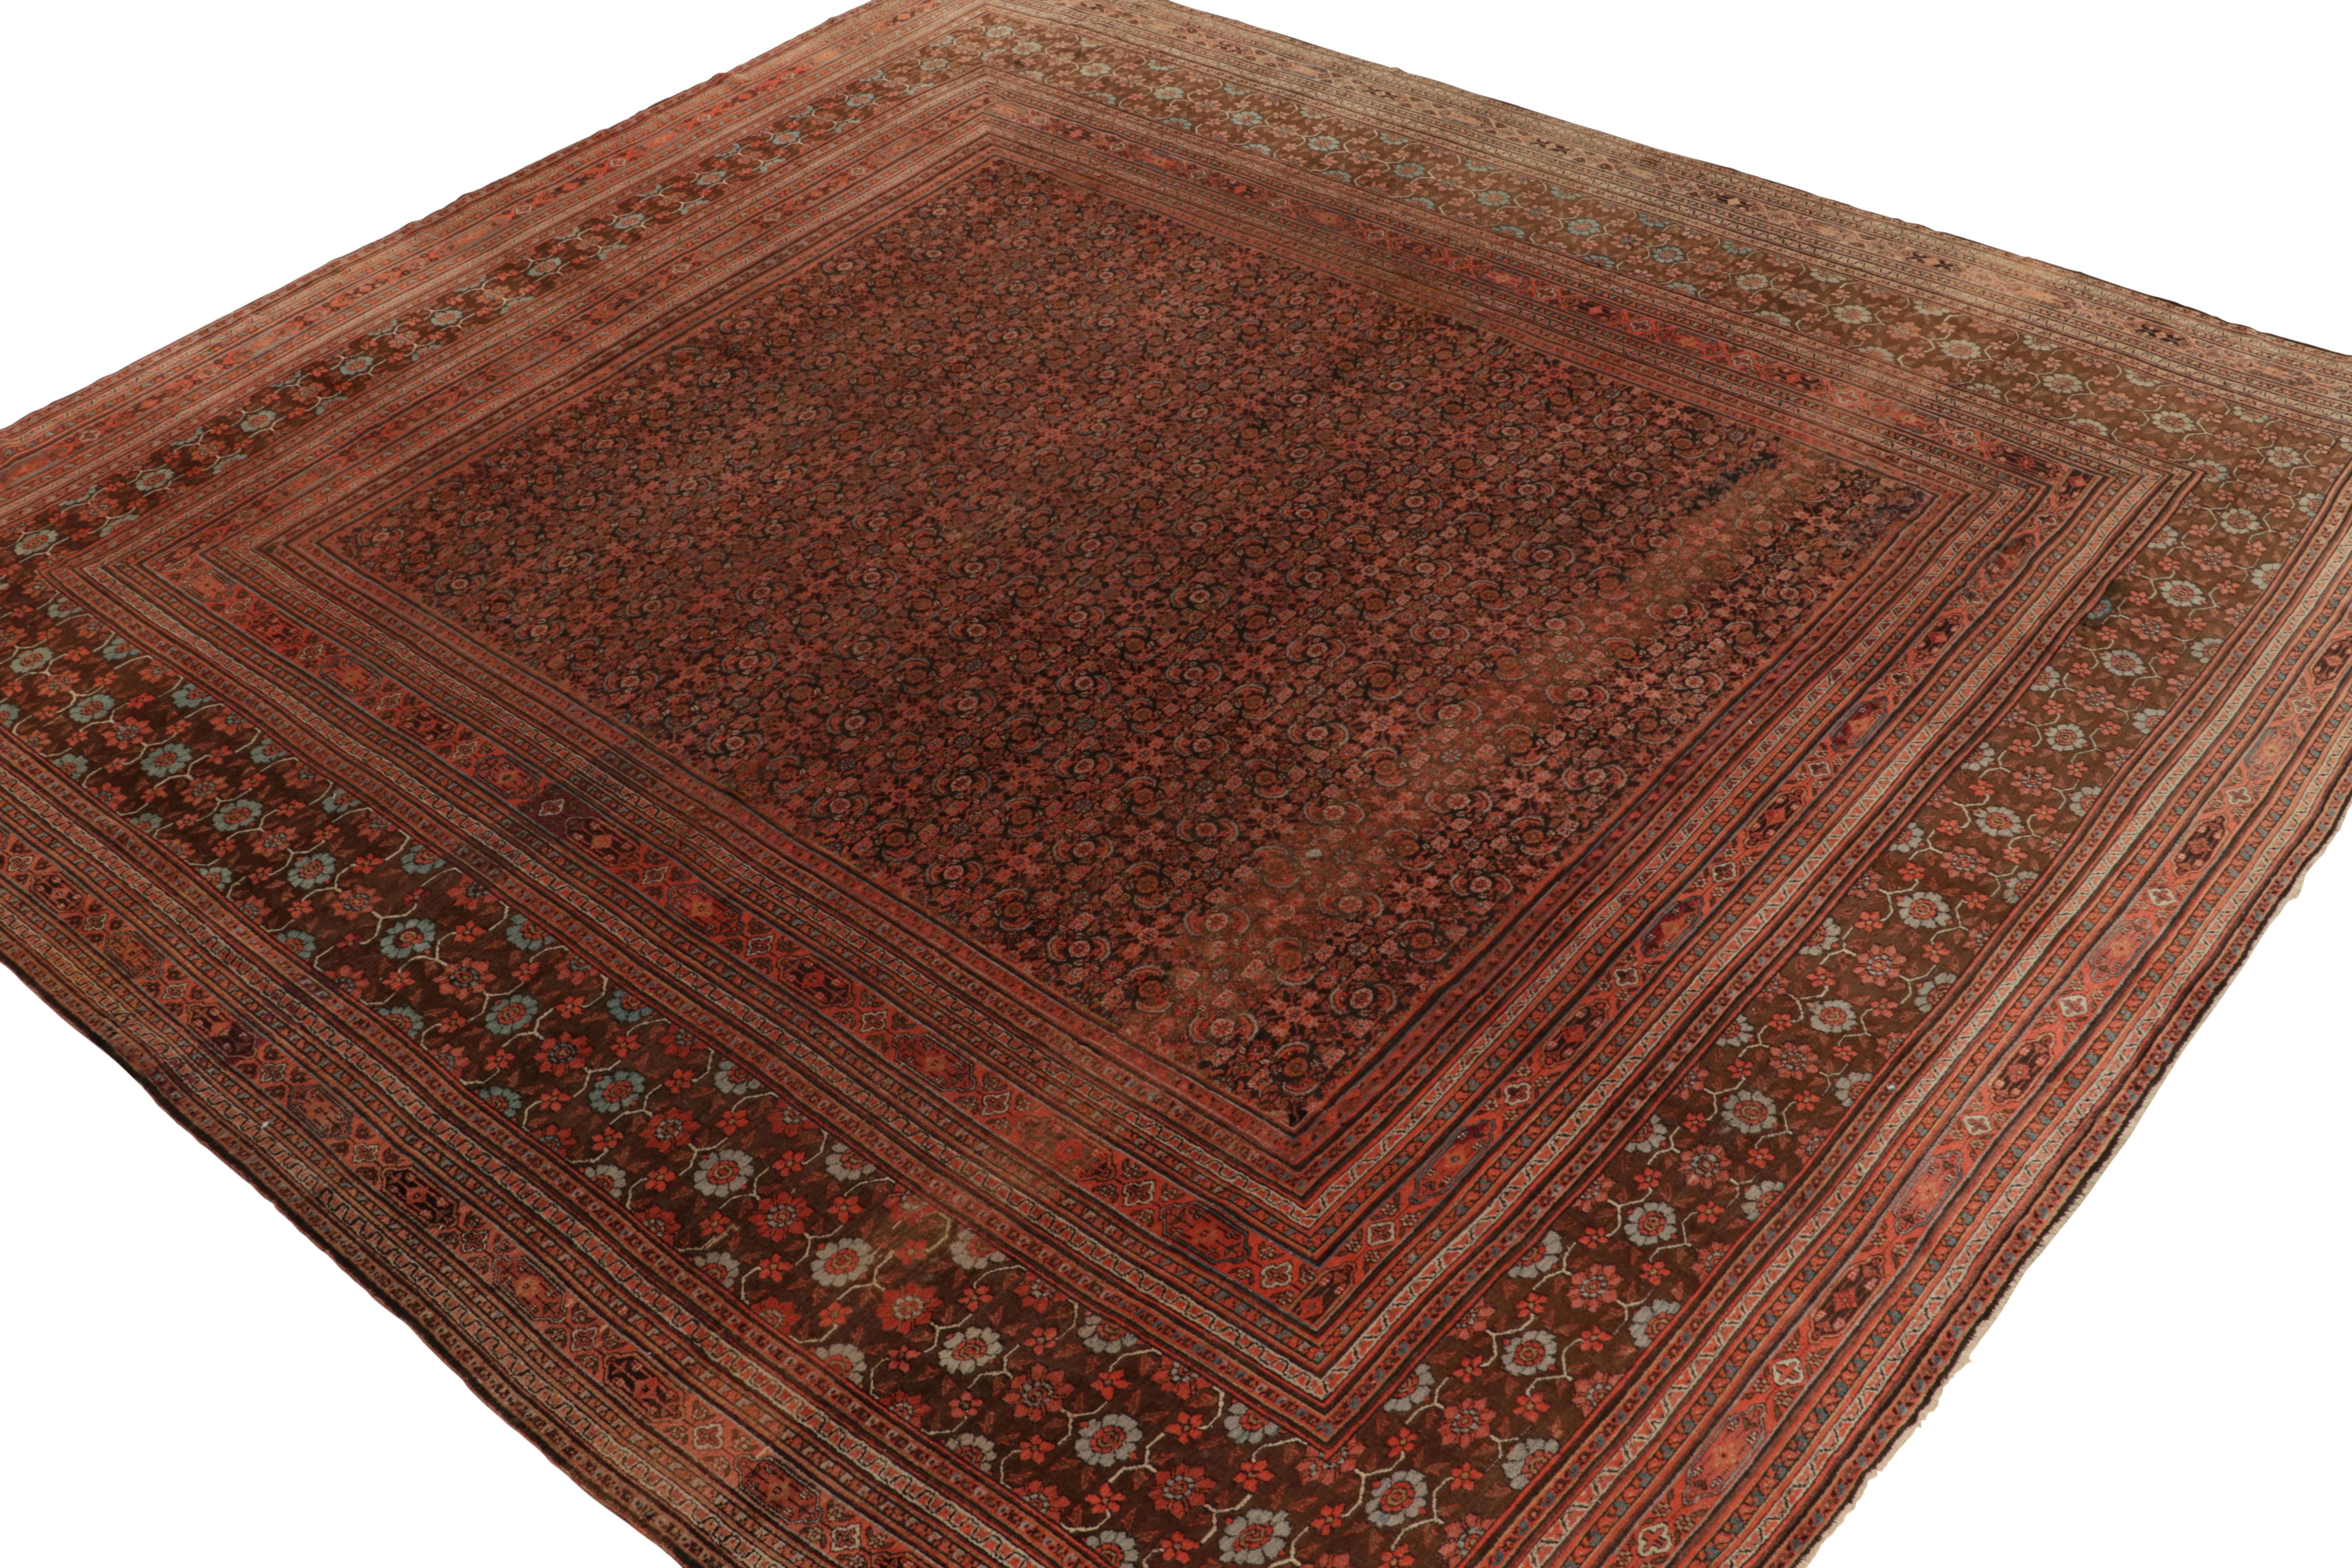 Persian Antique Doroksh Rug in Red Brown & Blue Herati Floral Pattern by Rug Kilim For Sale